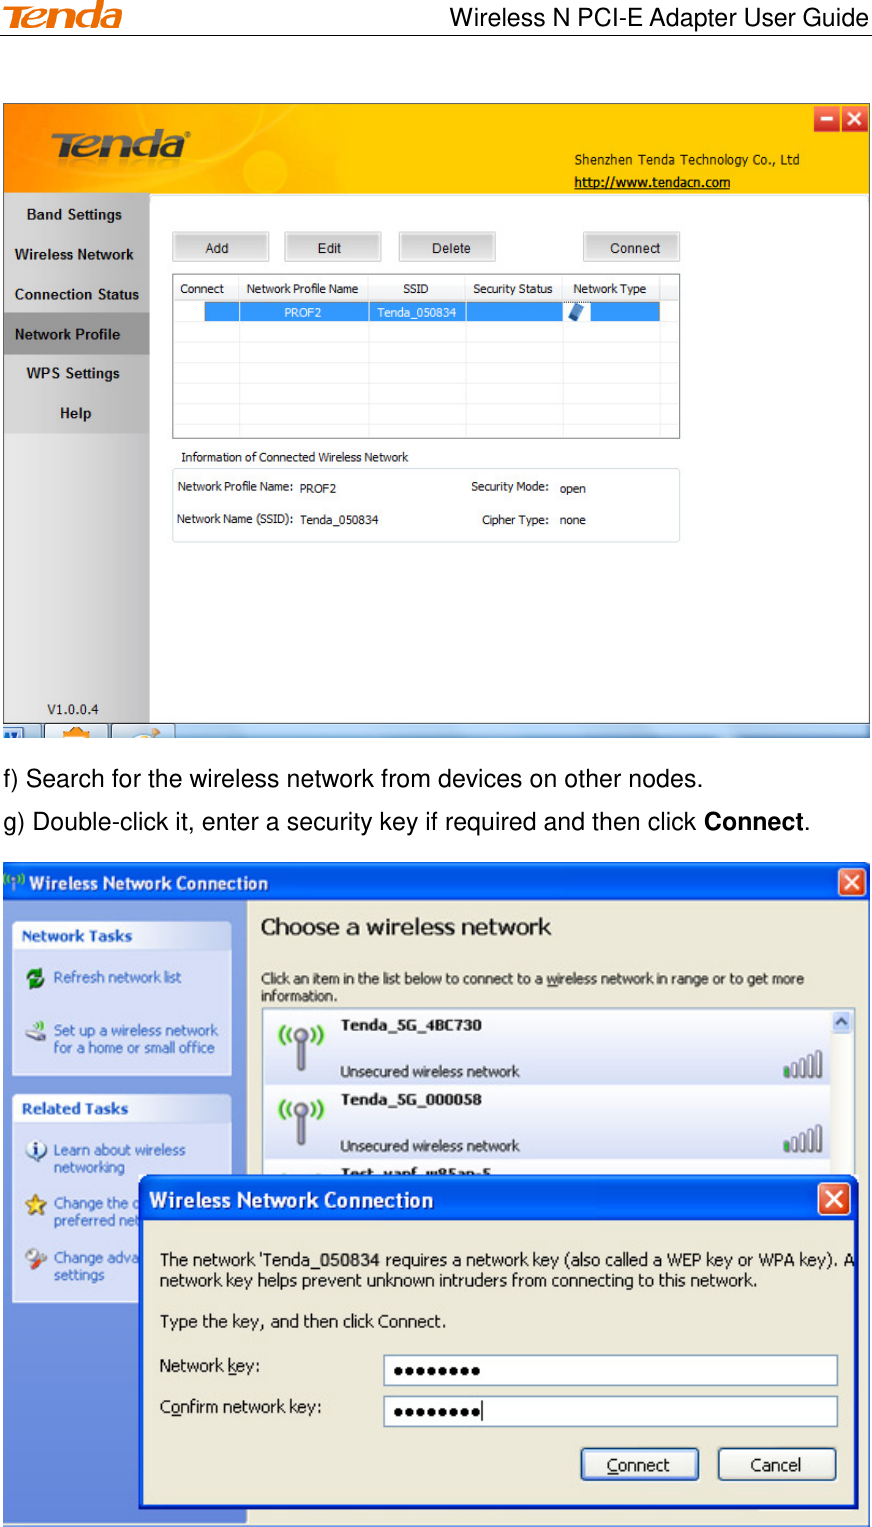                                    Wireless N PCI-E Adapter User Guide  f) Search for the wireless network from devices on other nodes. g) Double-click it, enter a security key if required and then click Connect.  